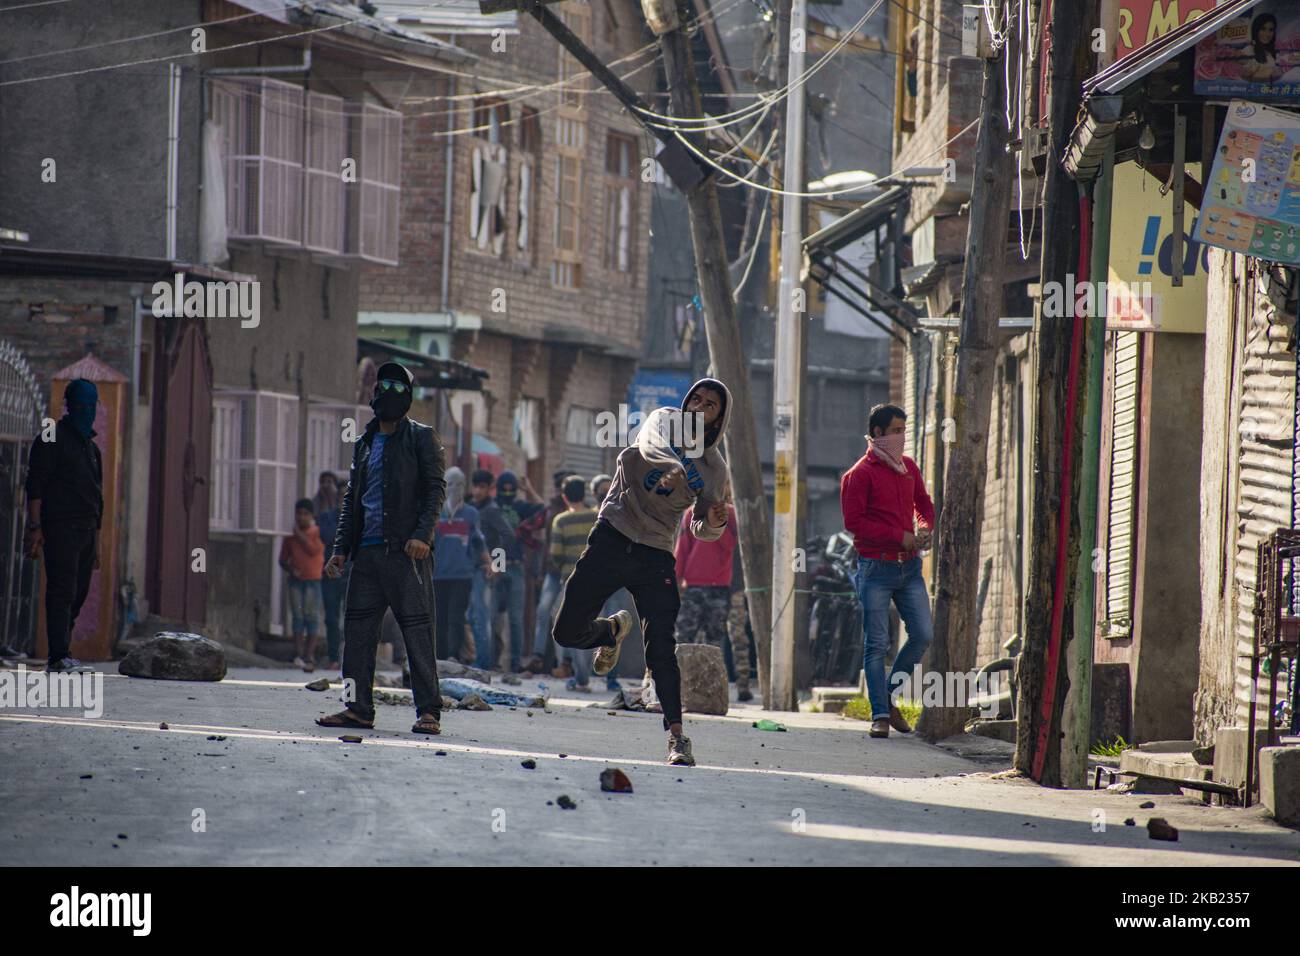 Kashmiri protesters throw stones at Indian government forces, during a protest against the killing of a Kashmiri rebel commander on October 12, 2018 in Srinagar, the summer capital of Indian administered Kashmir, India. Kashmiri youth clashed with Indian government forces who were deployed in strength in different parts of Srinagar on Friday to prevent protests against the killing of a Kashmiri rebel commander in Kupwara district of Indian-administered Kashmir the previous day. Manan Wani, who had quit his doctorate in Geology at an Indian university to join the Hizb-ul-Mujahideen militant out Stock Photo